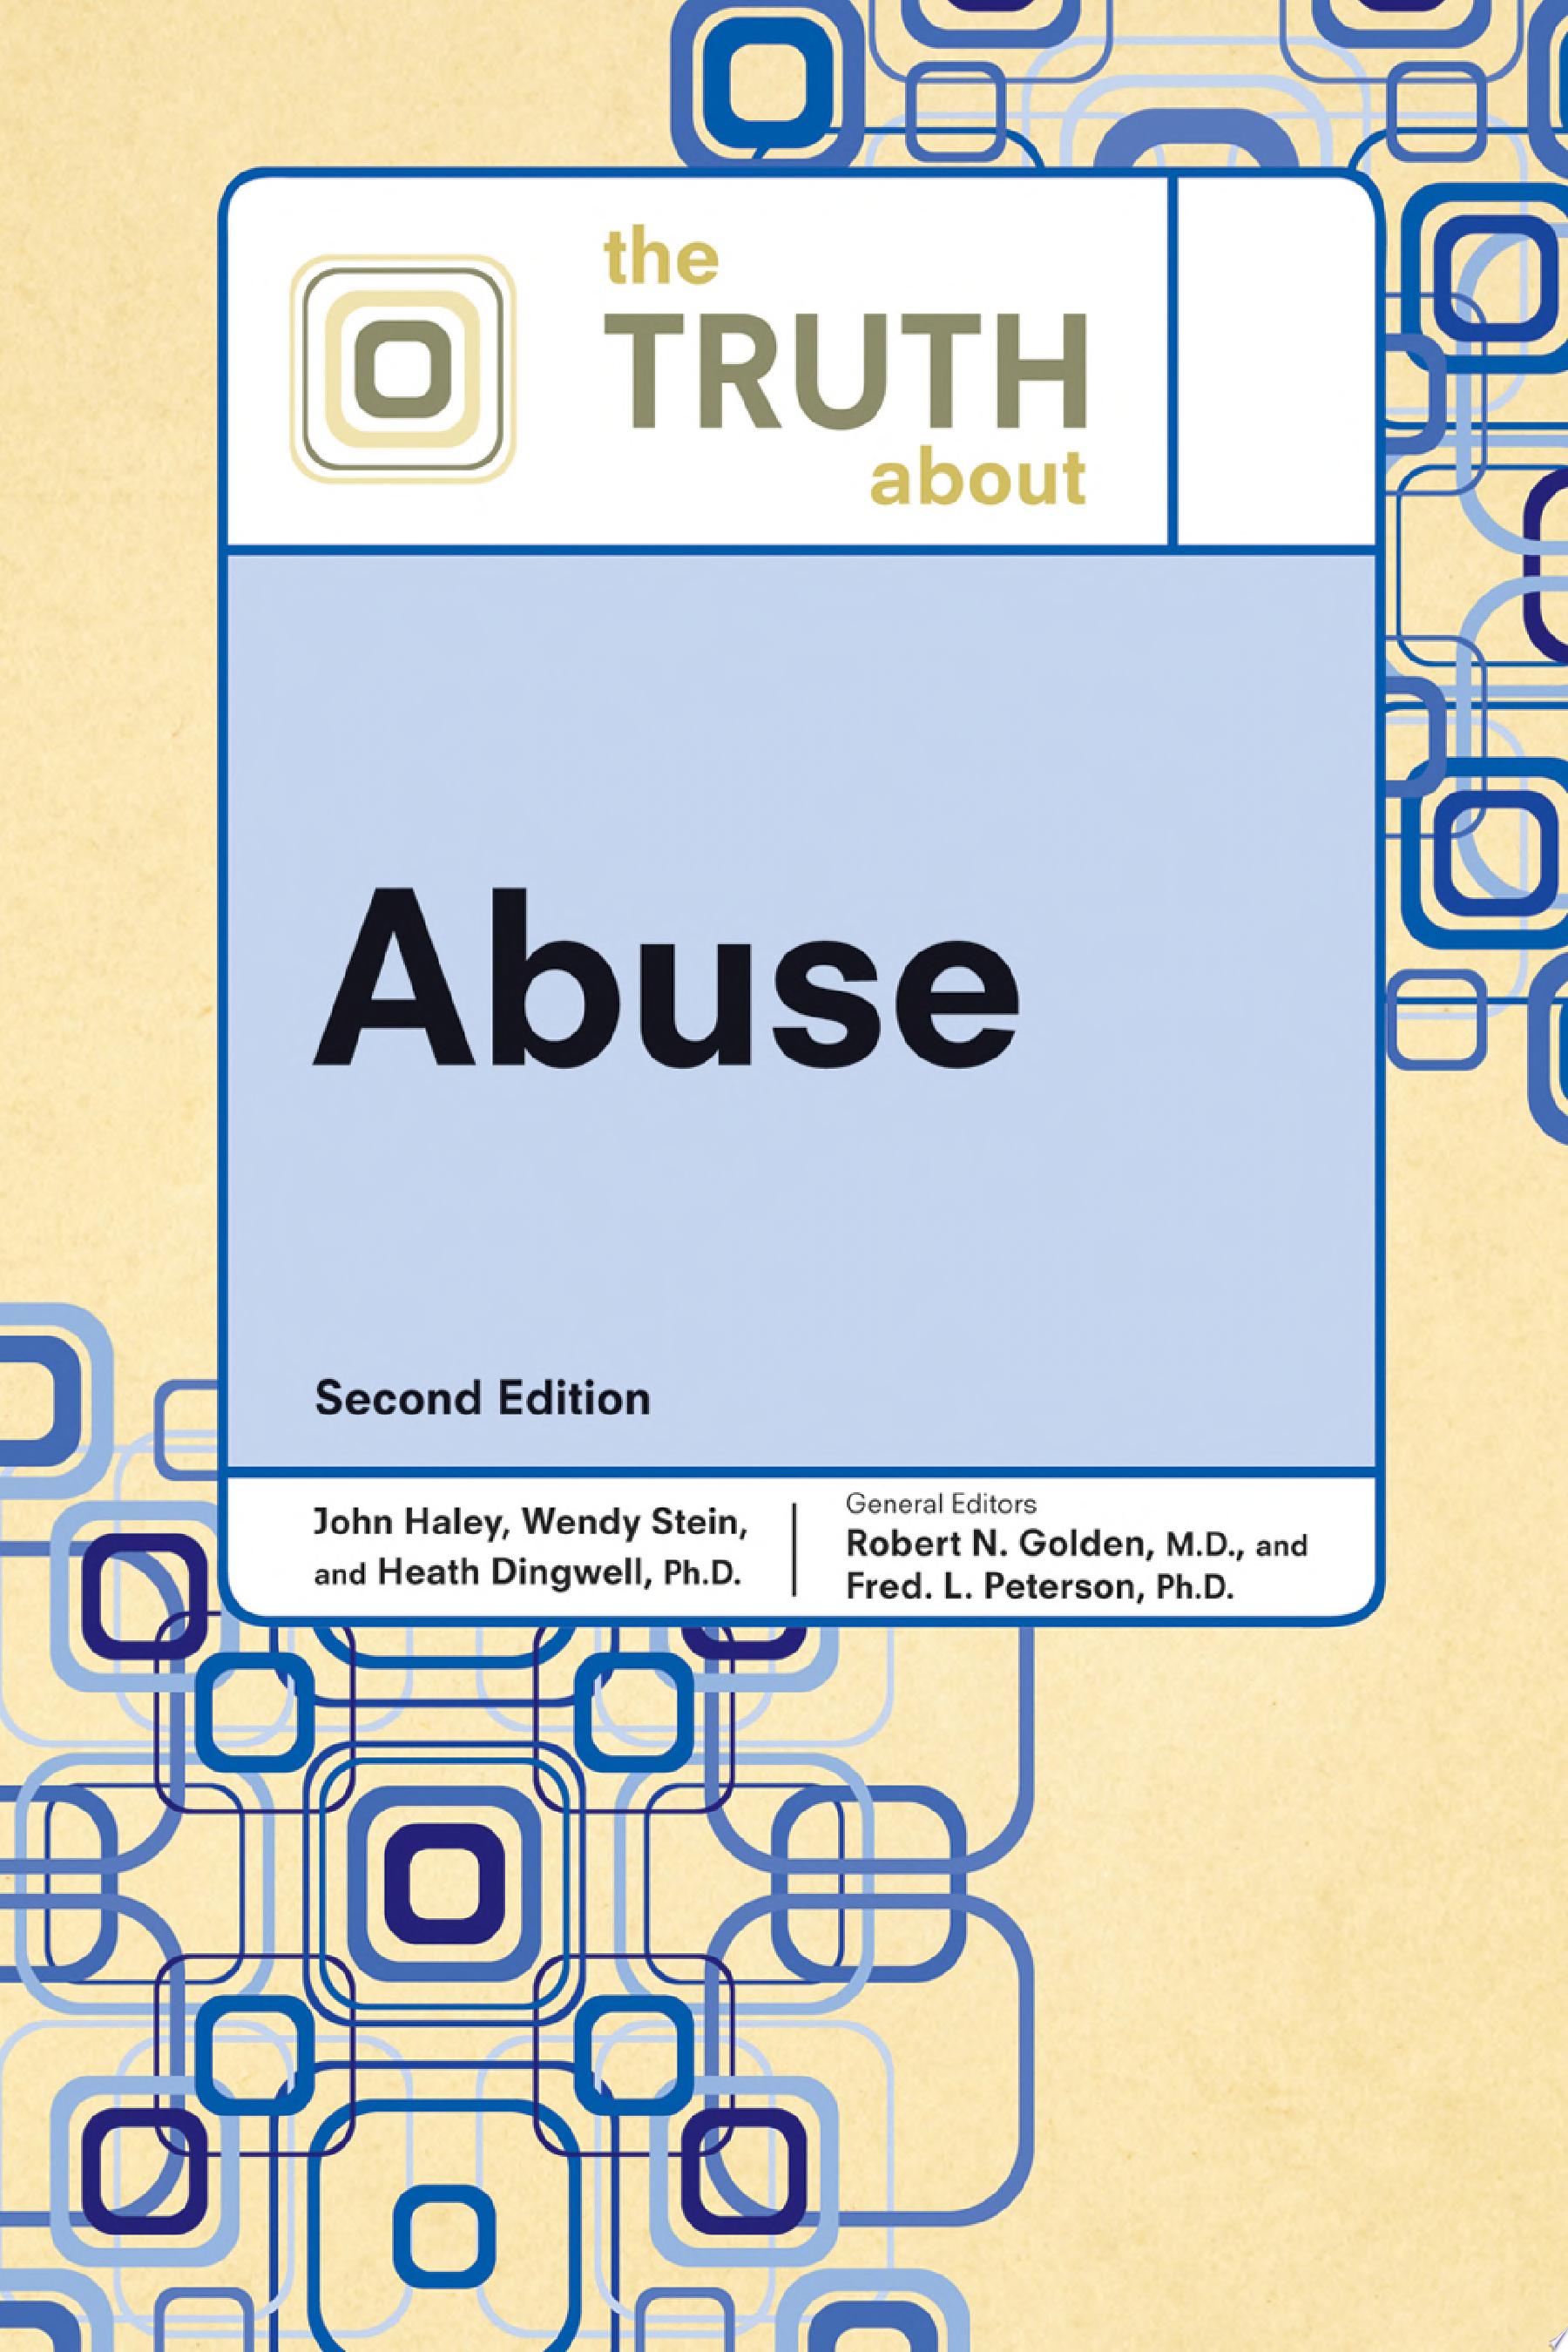 Image for "The Truth about Abuse"